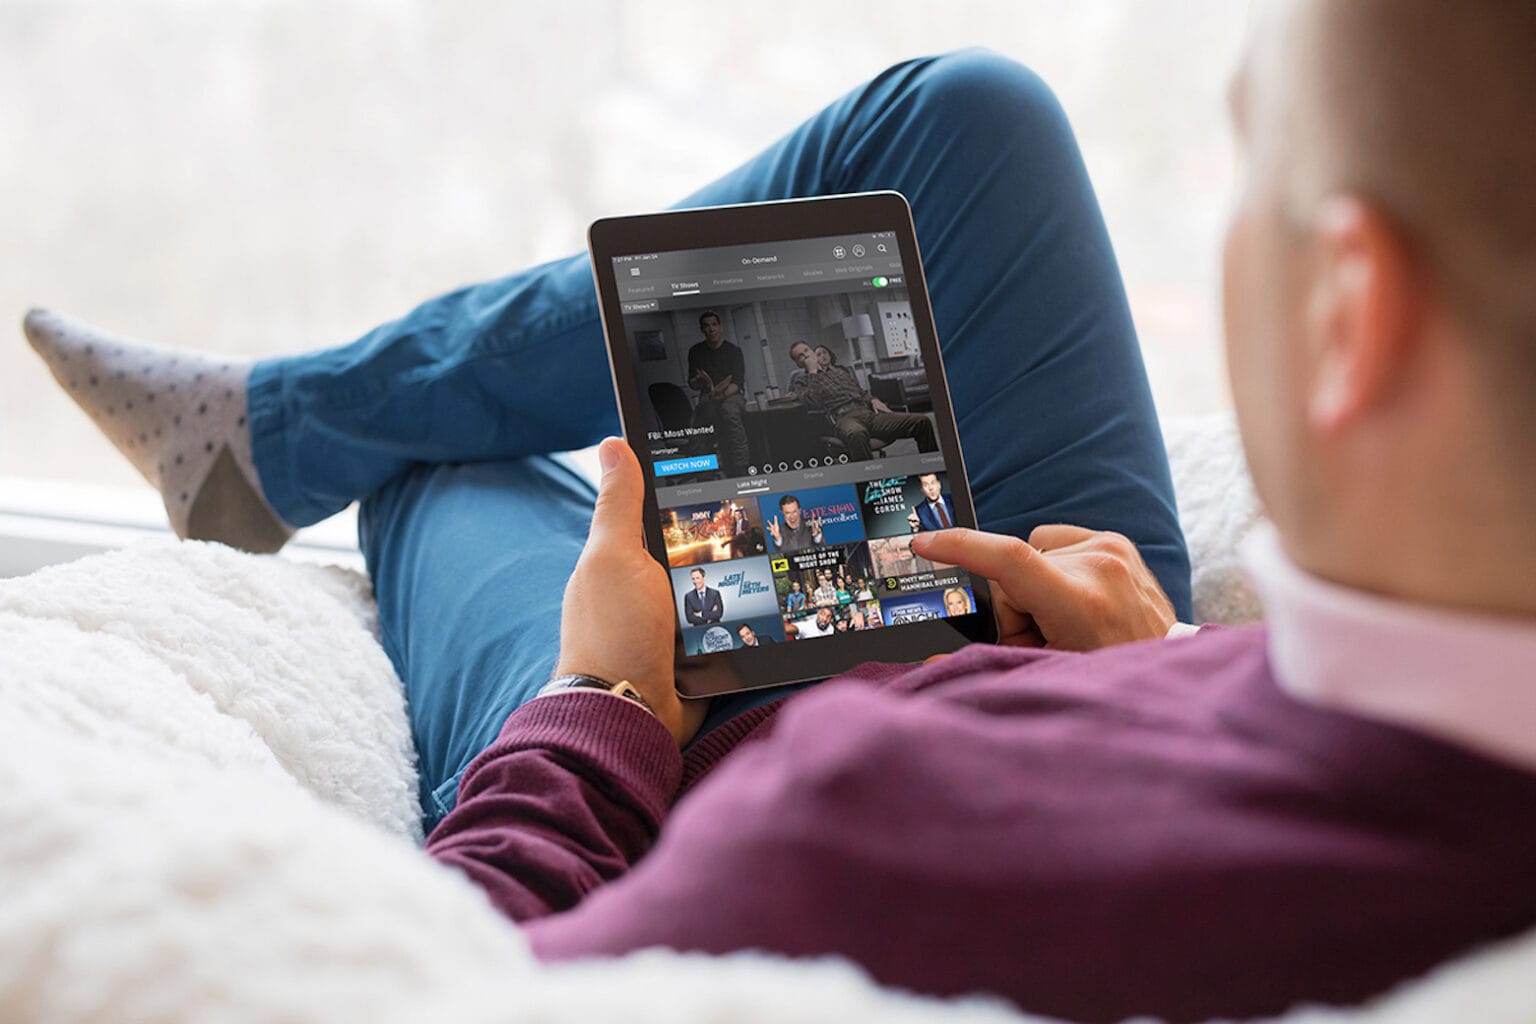 SelectTV offers a new look at streaming entertainment.